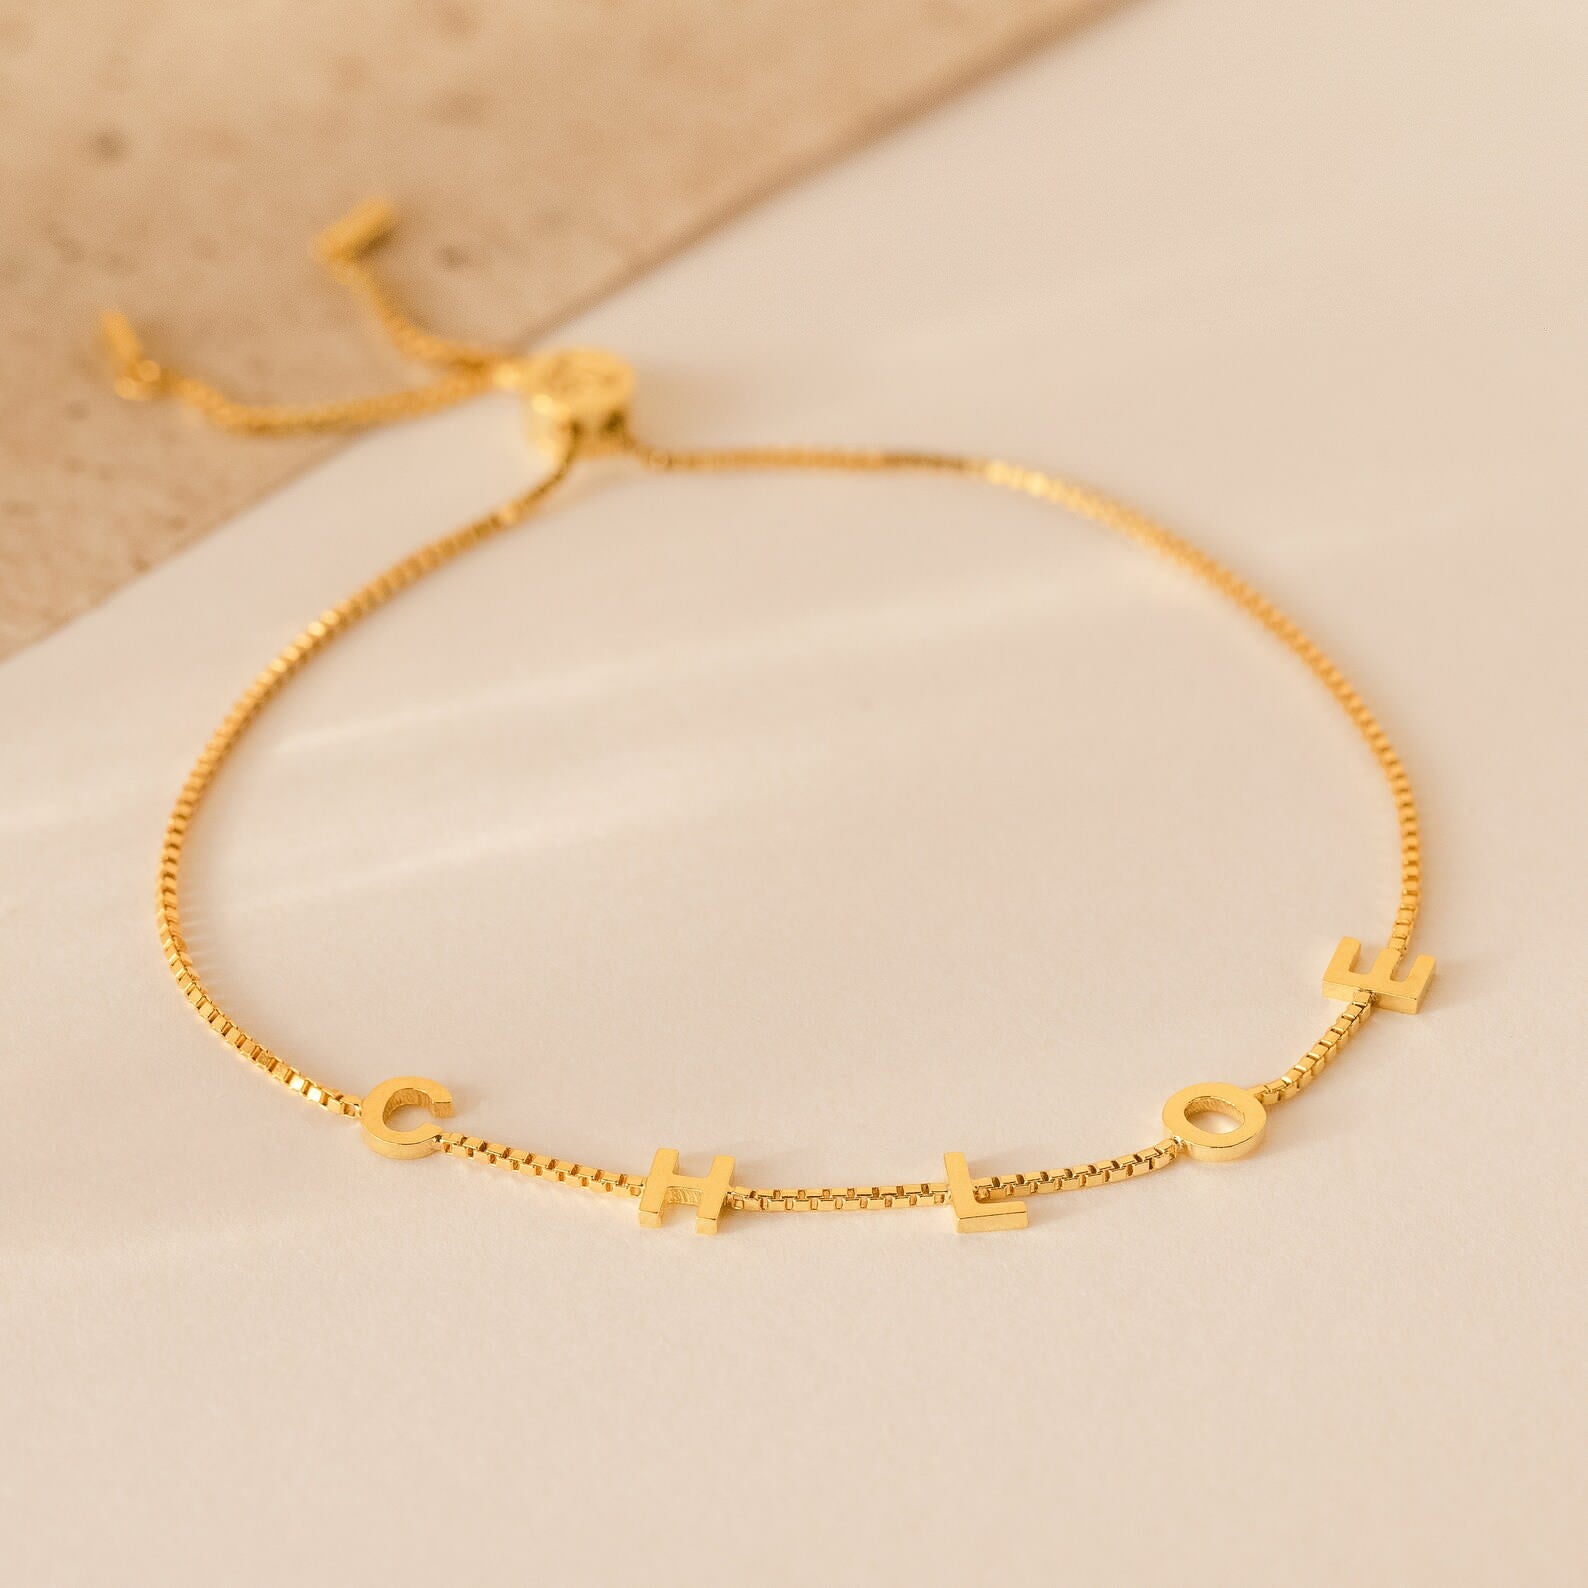 Shop Gold Chain Bracelets Online in India | Upto 50% Off Price